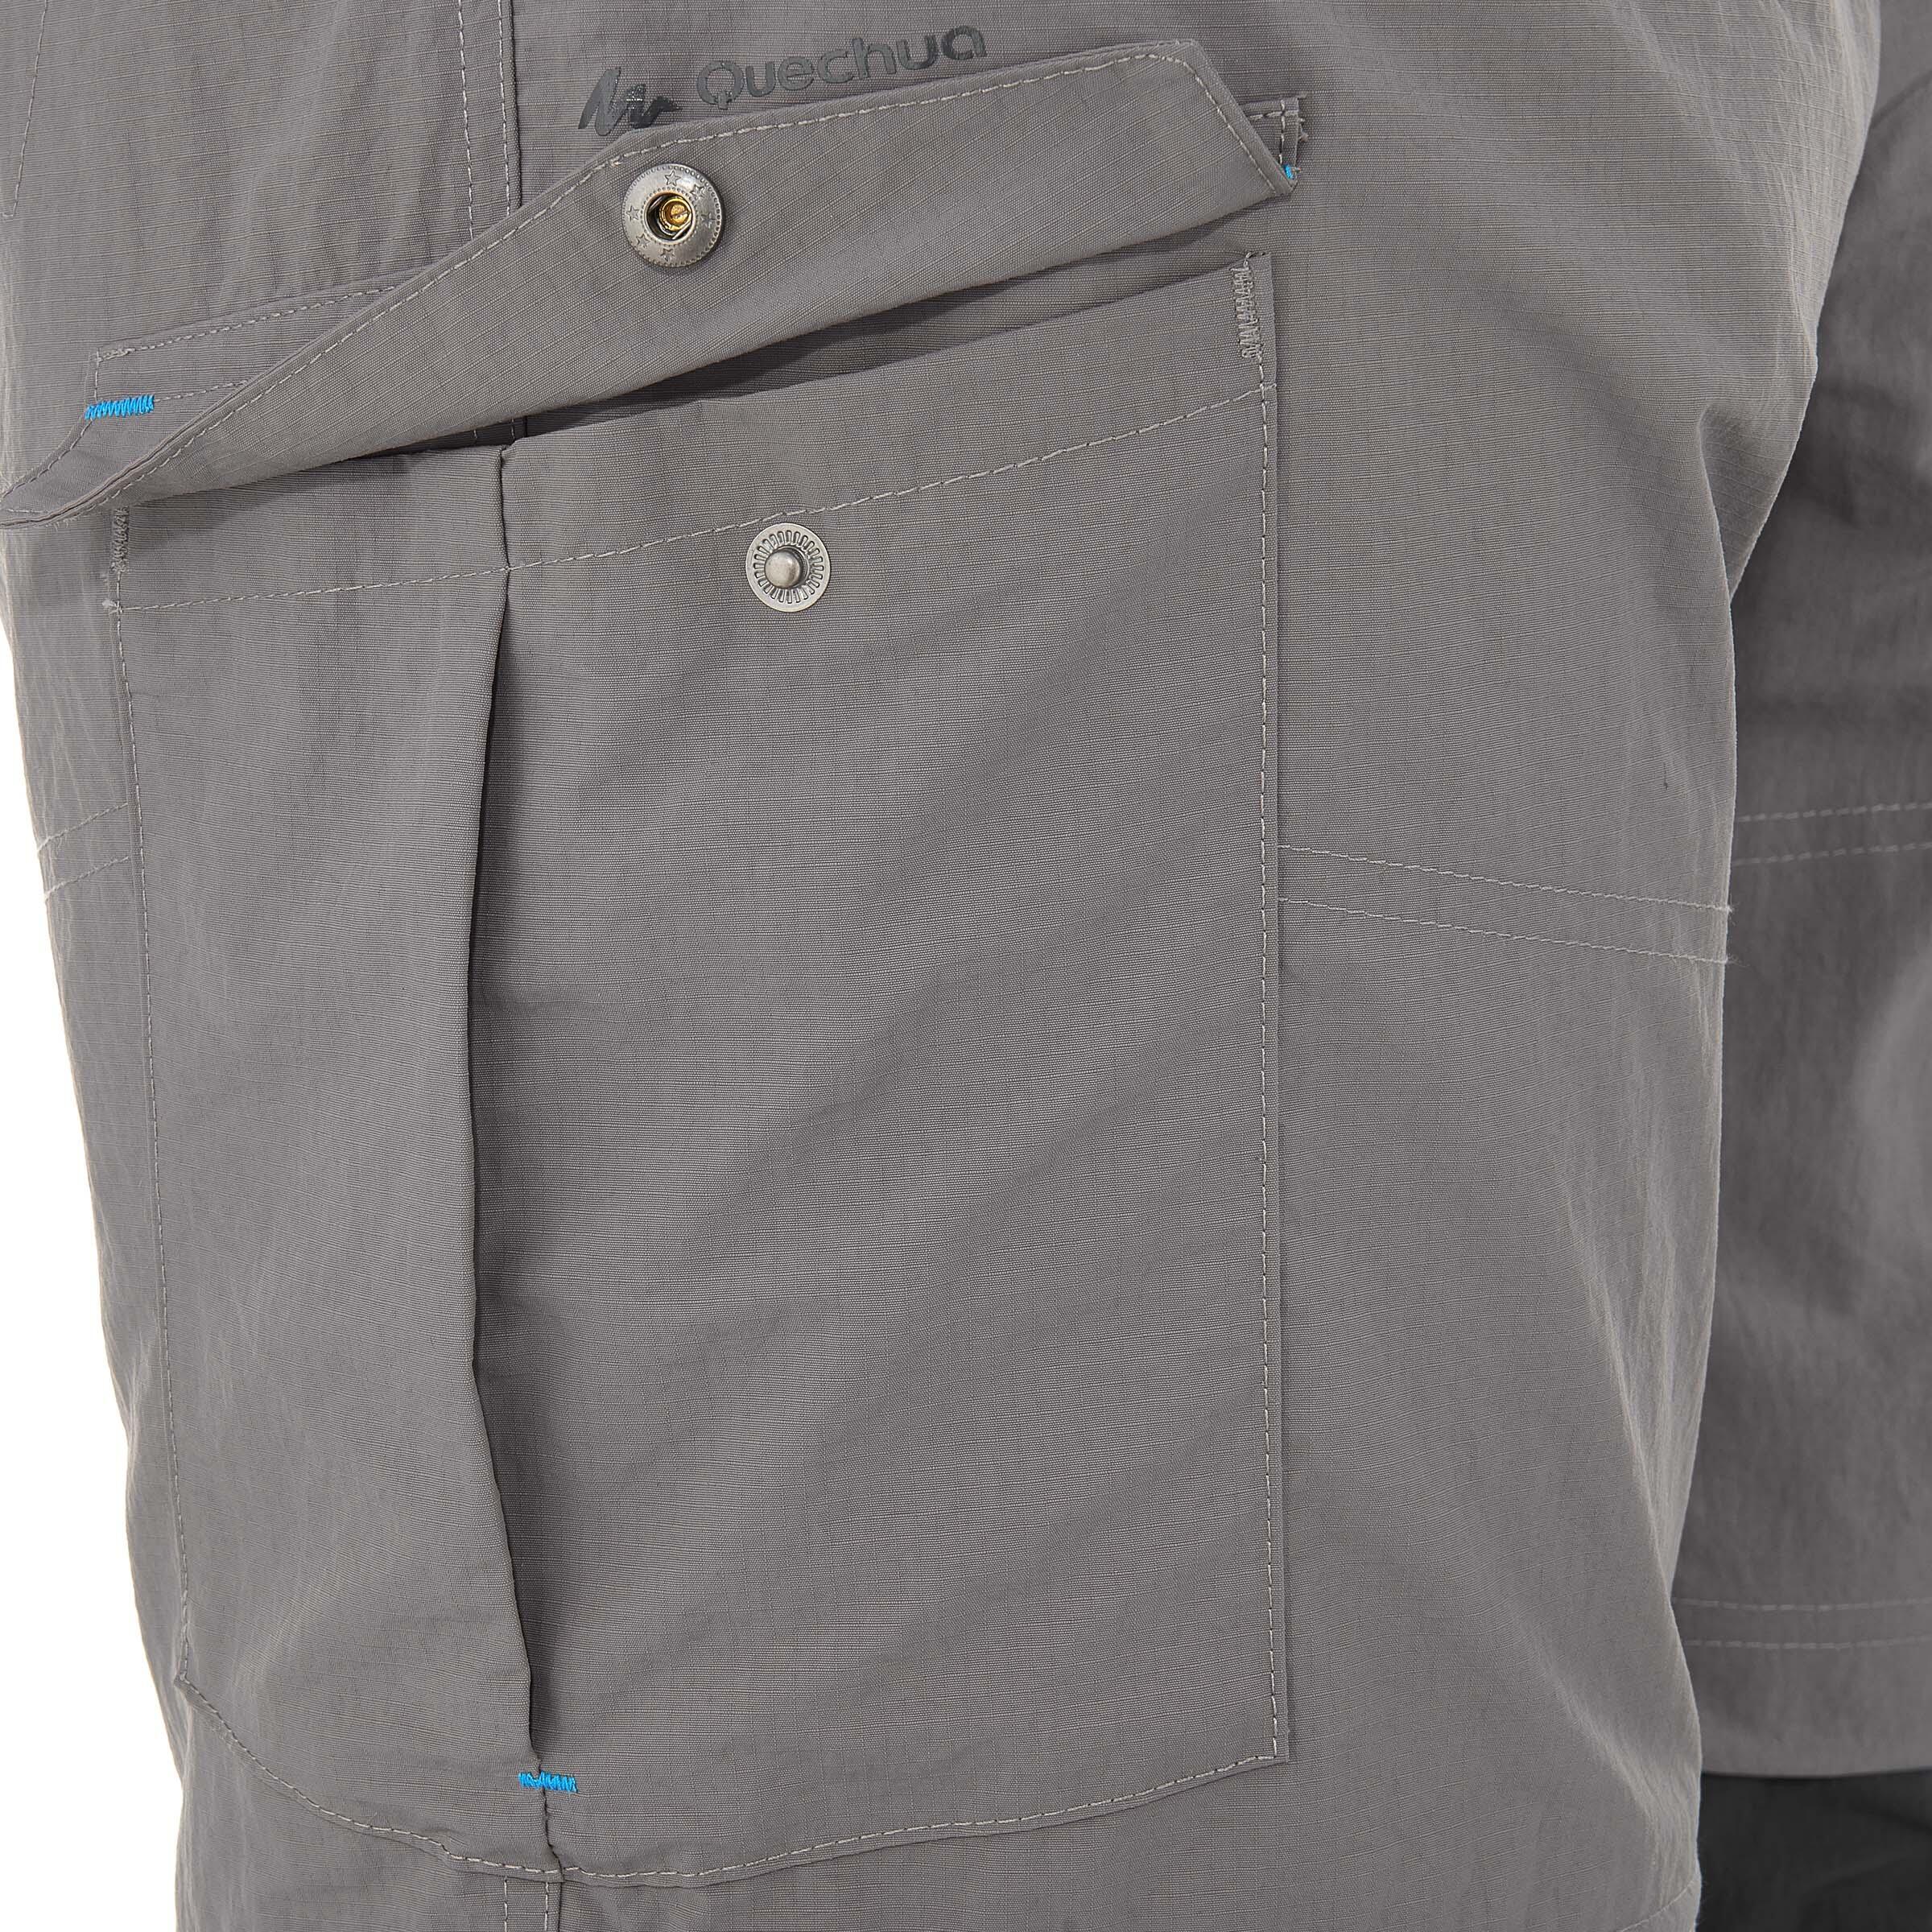 Forclaz 100 convertible hiking trousers - Light Grey 9/19